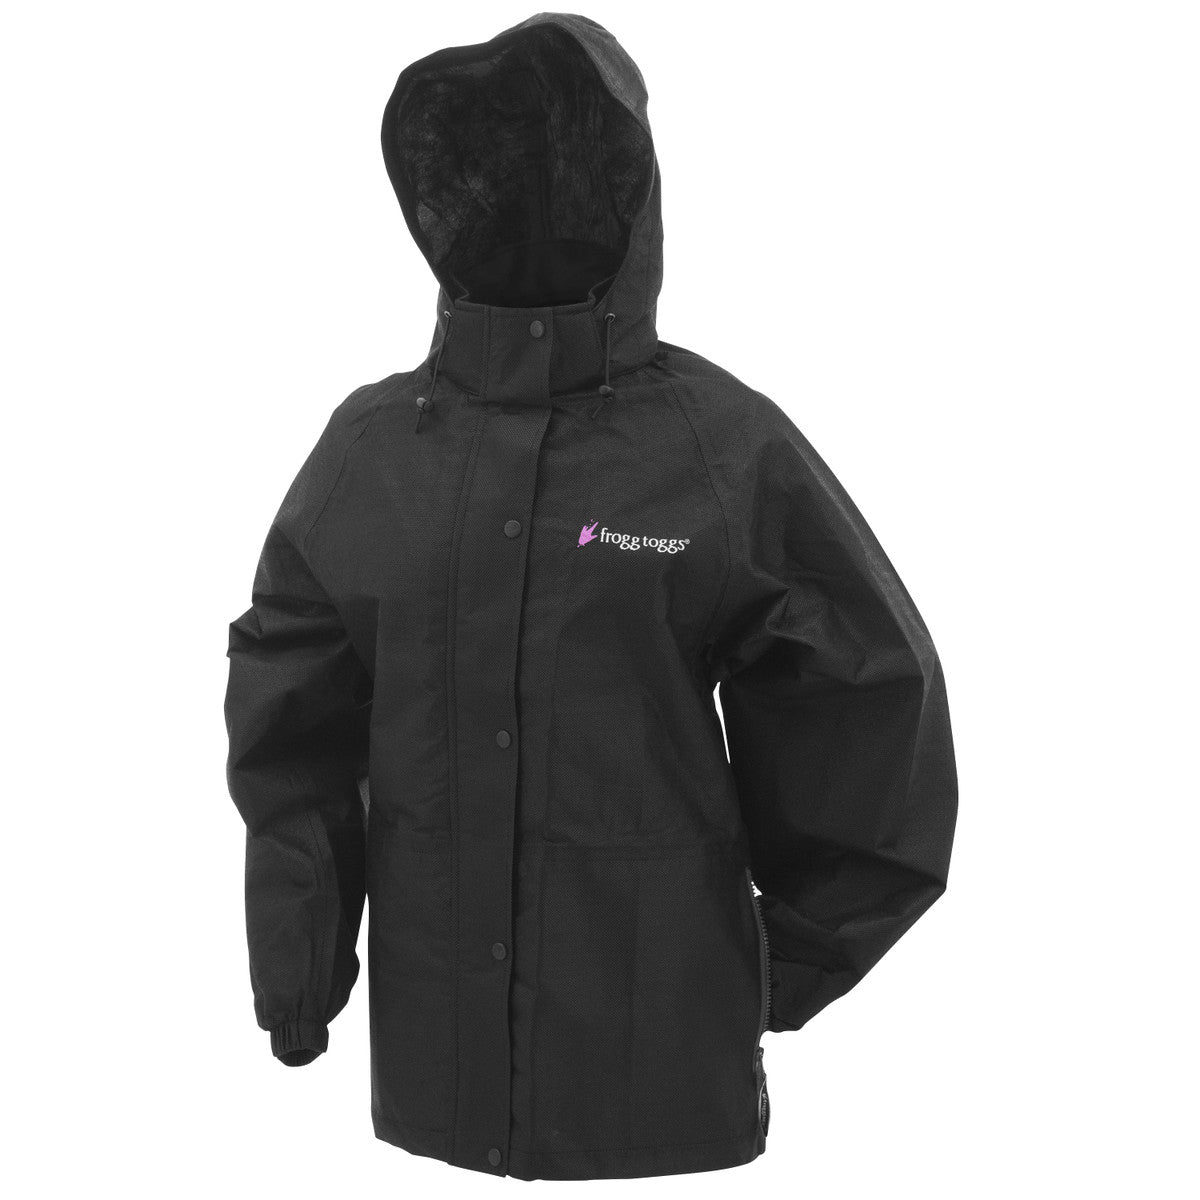 Frogg Togg Women's Pro Action Jacket - KBM Outdoors